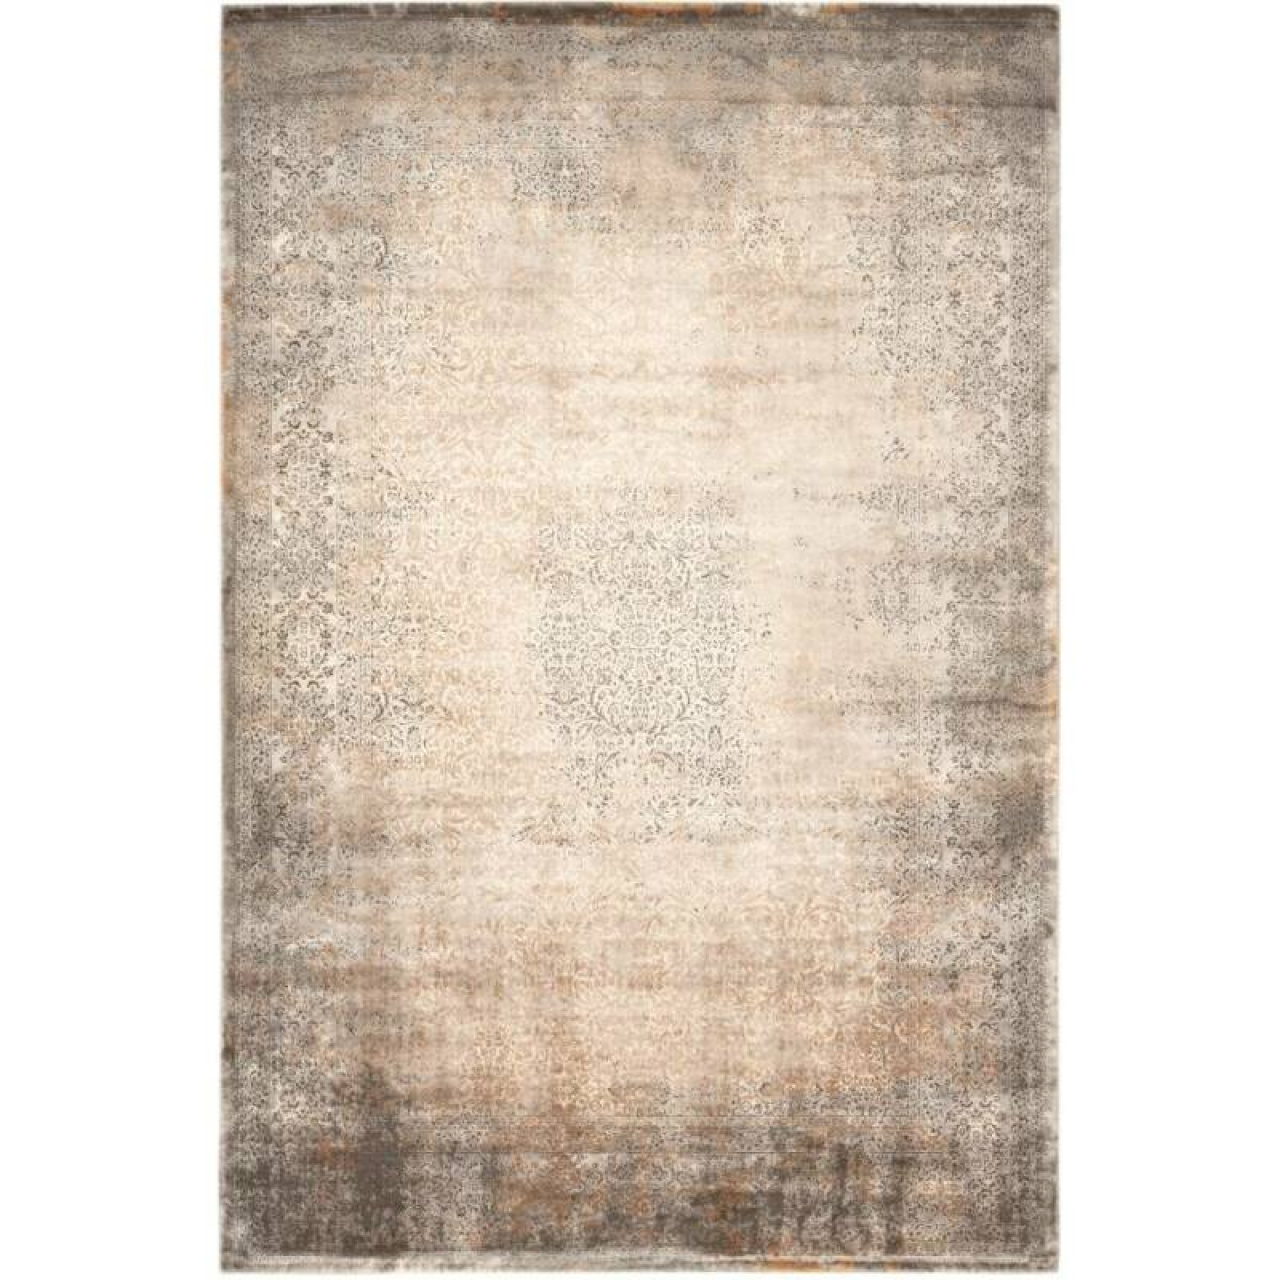 Obsession Haute Couture Jewel 954 Taupe szőnyeg-200x290